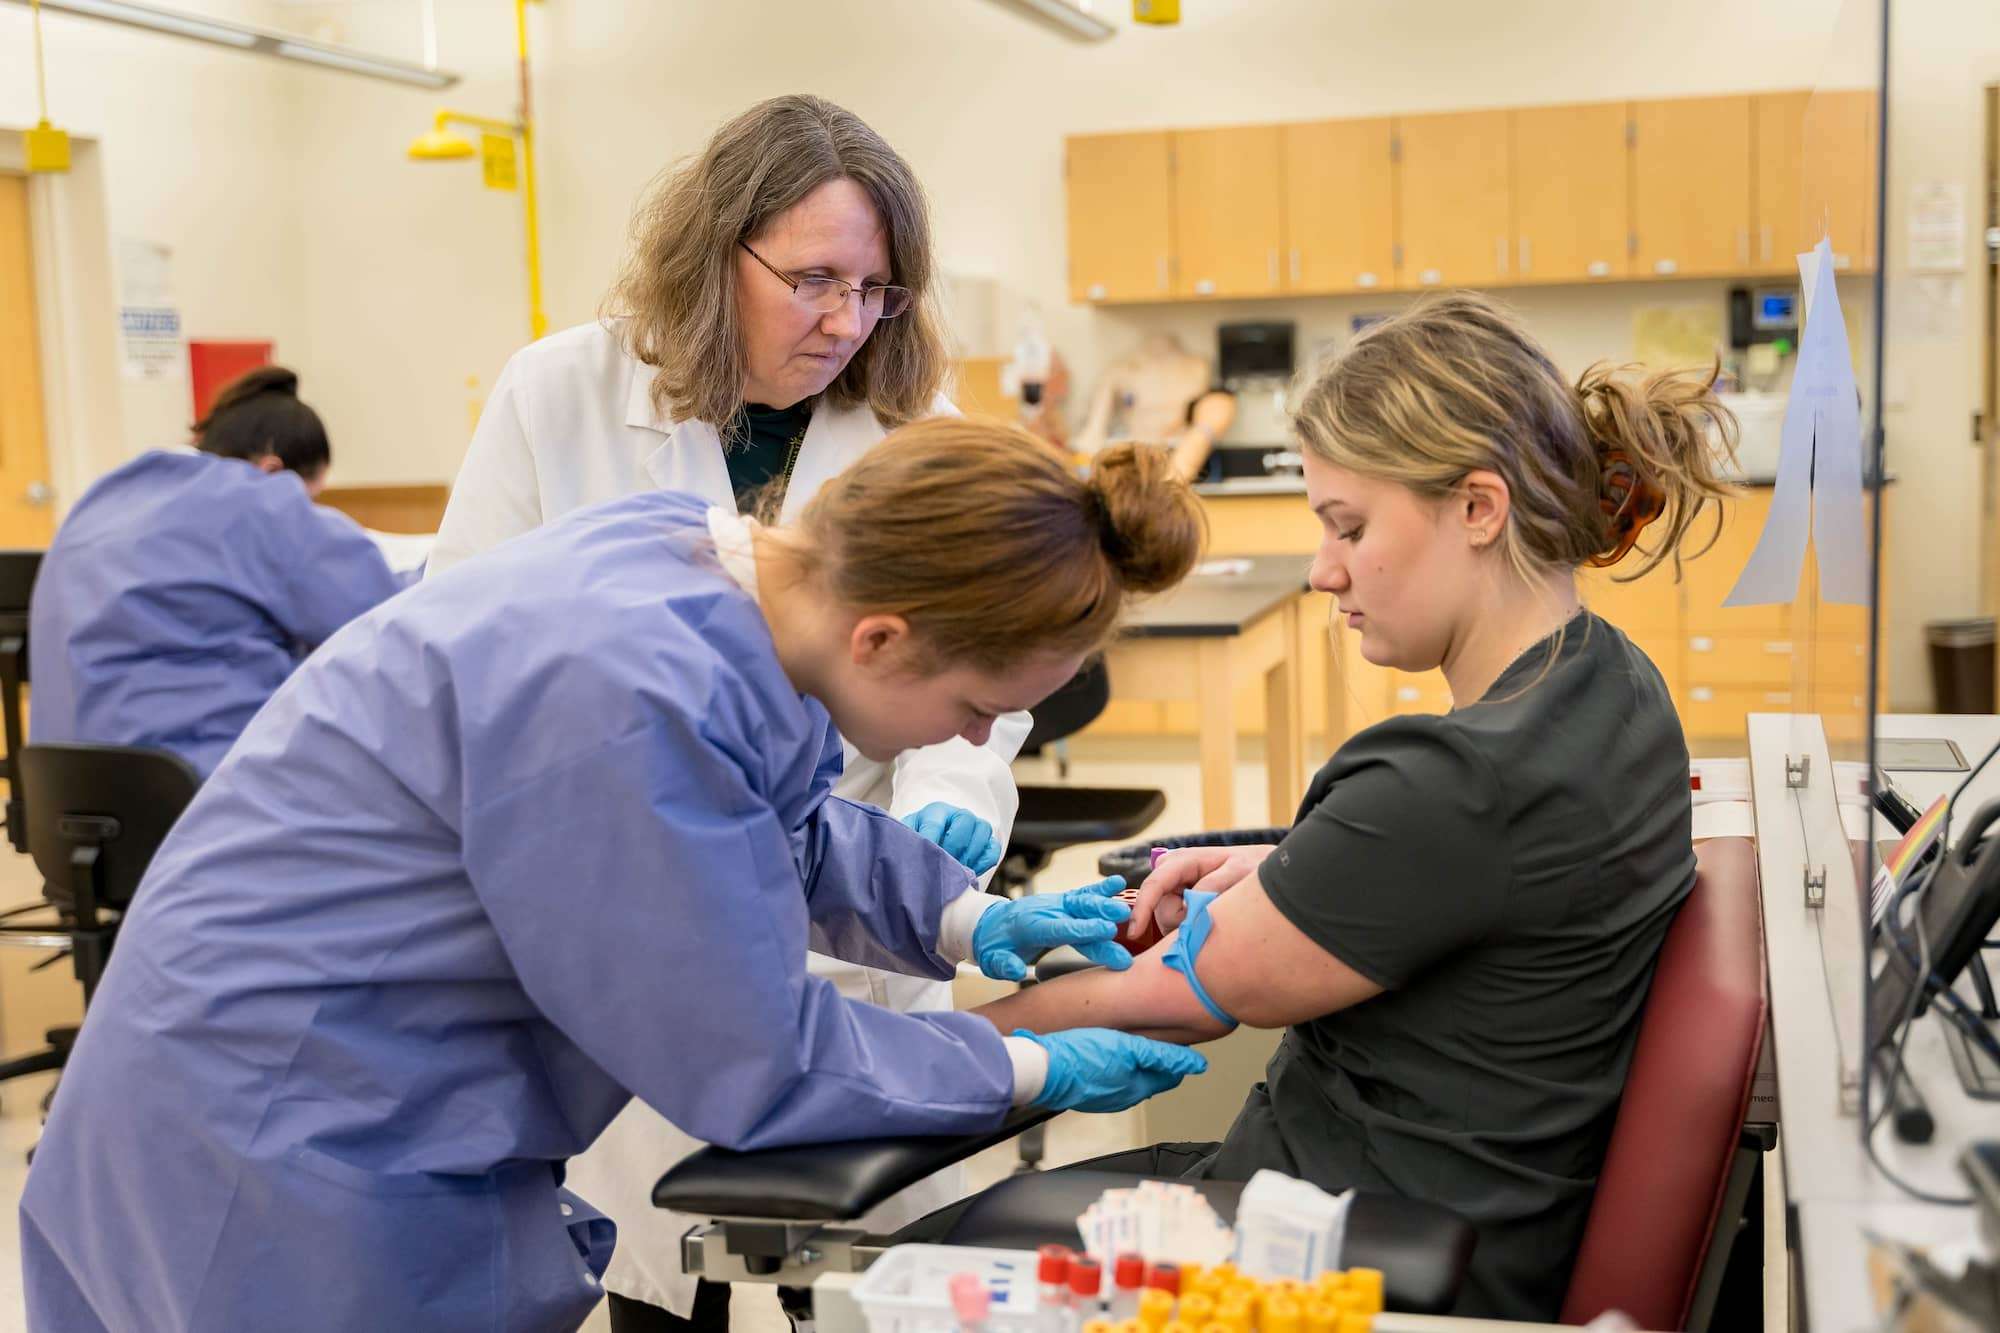 An instructor watches on as a student prepares to draw blood from a patient's arm.